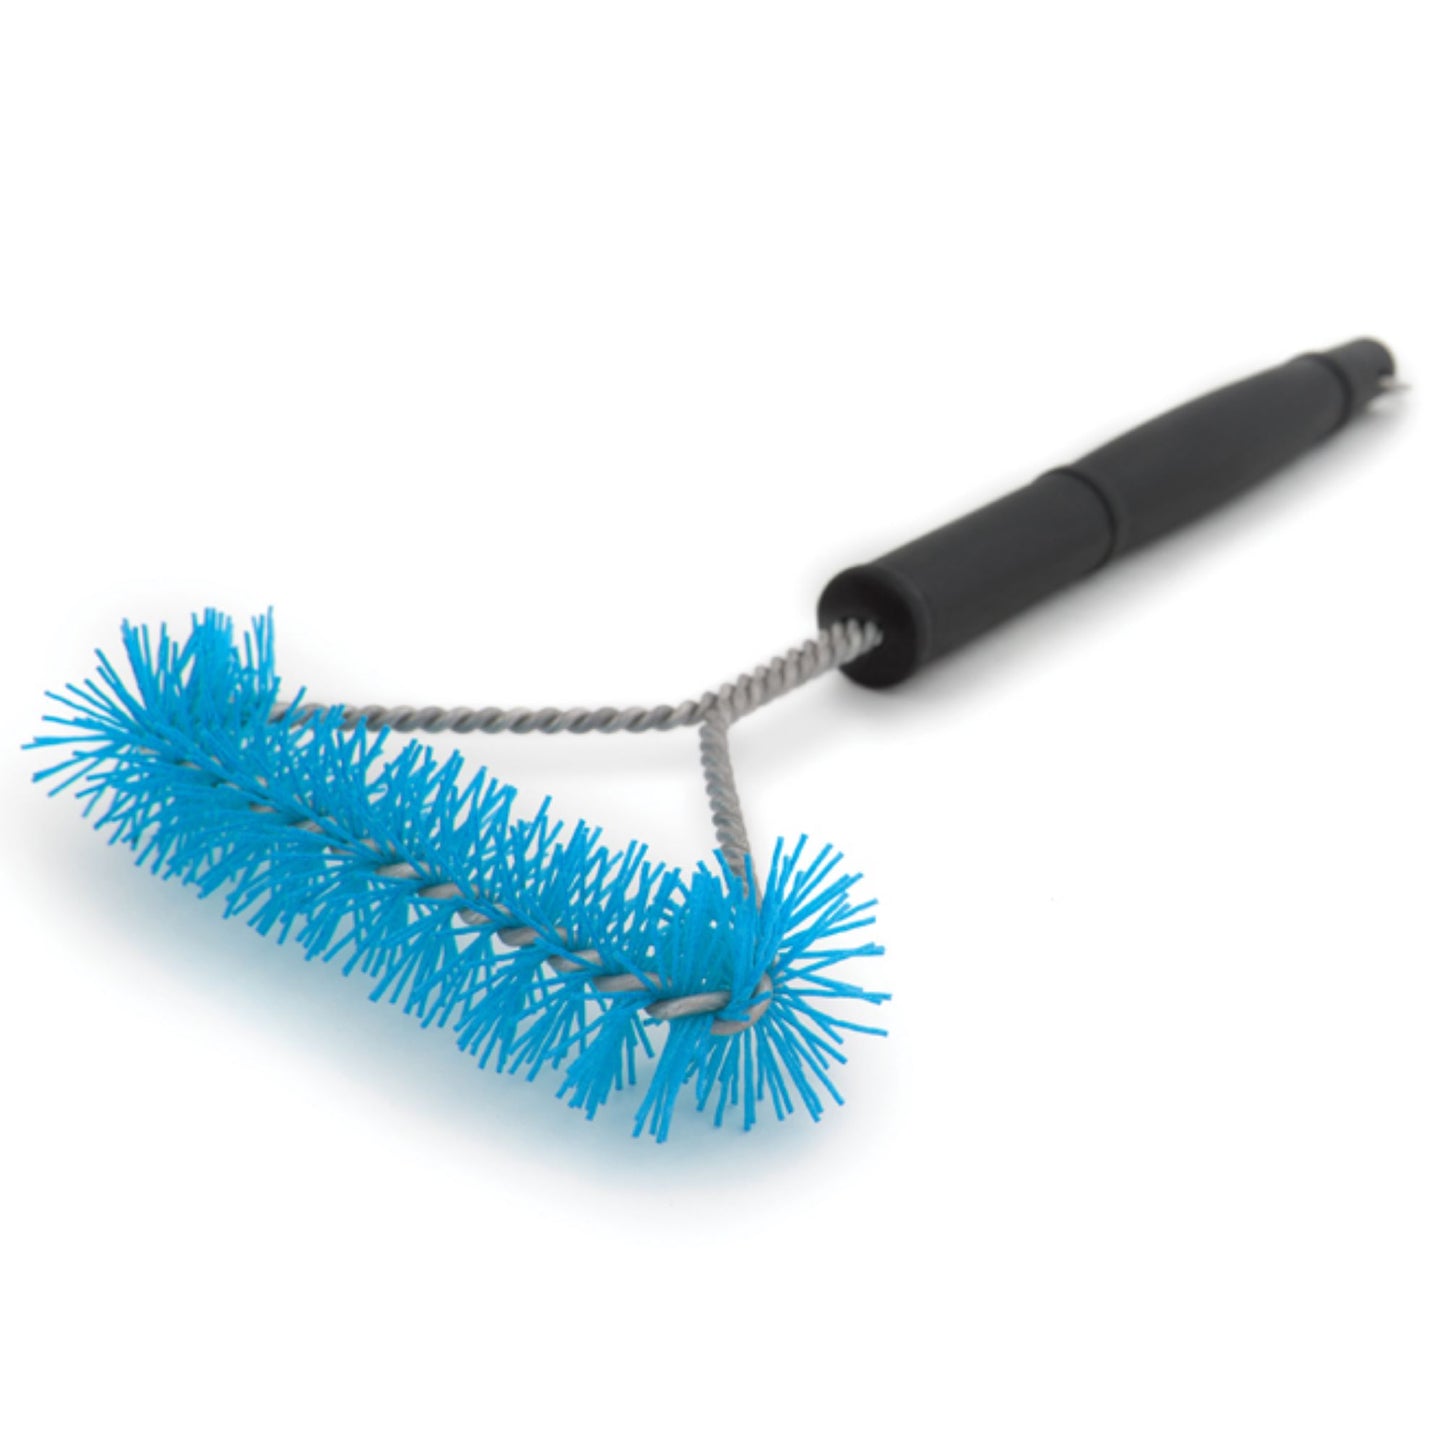 GrillPro Extra Wide Grill Brush Nylon